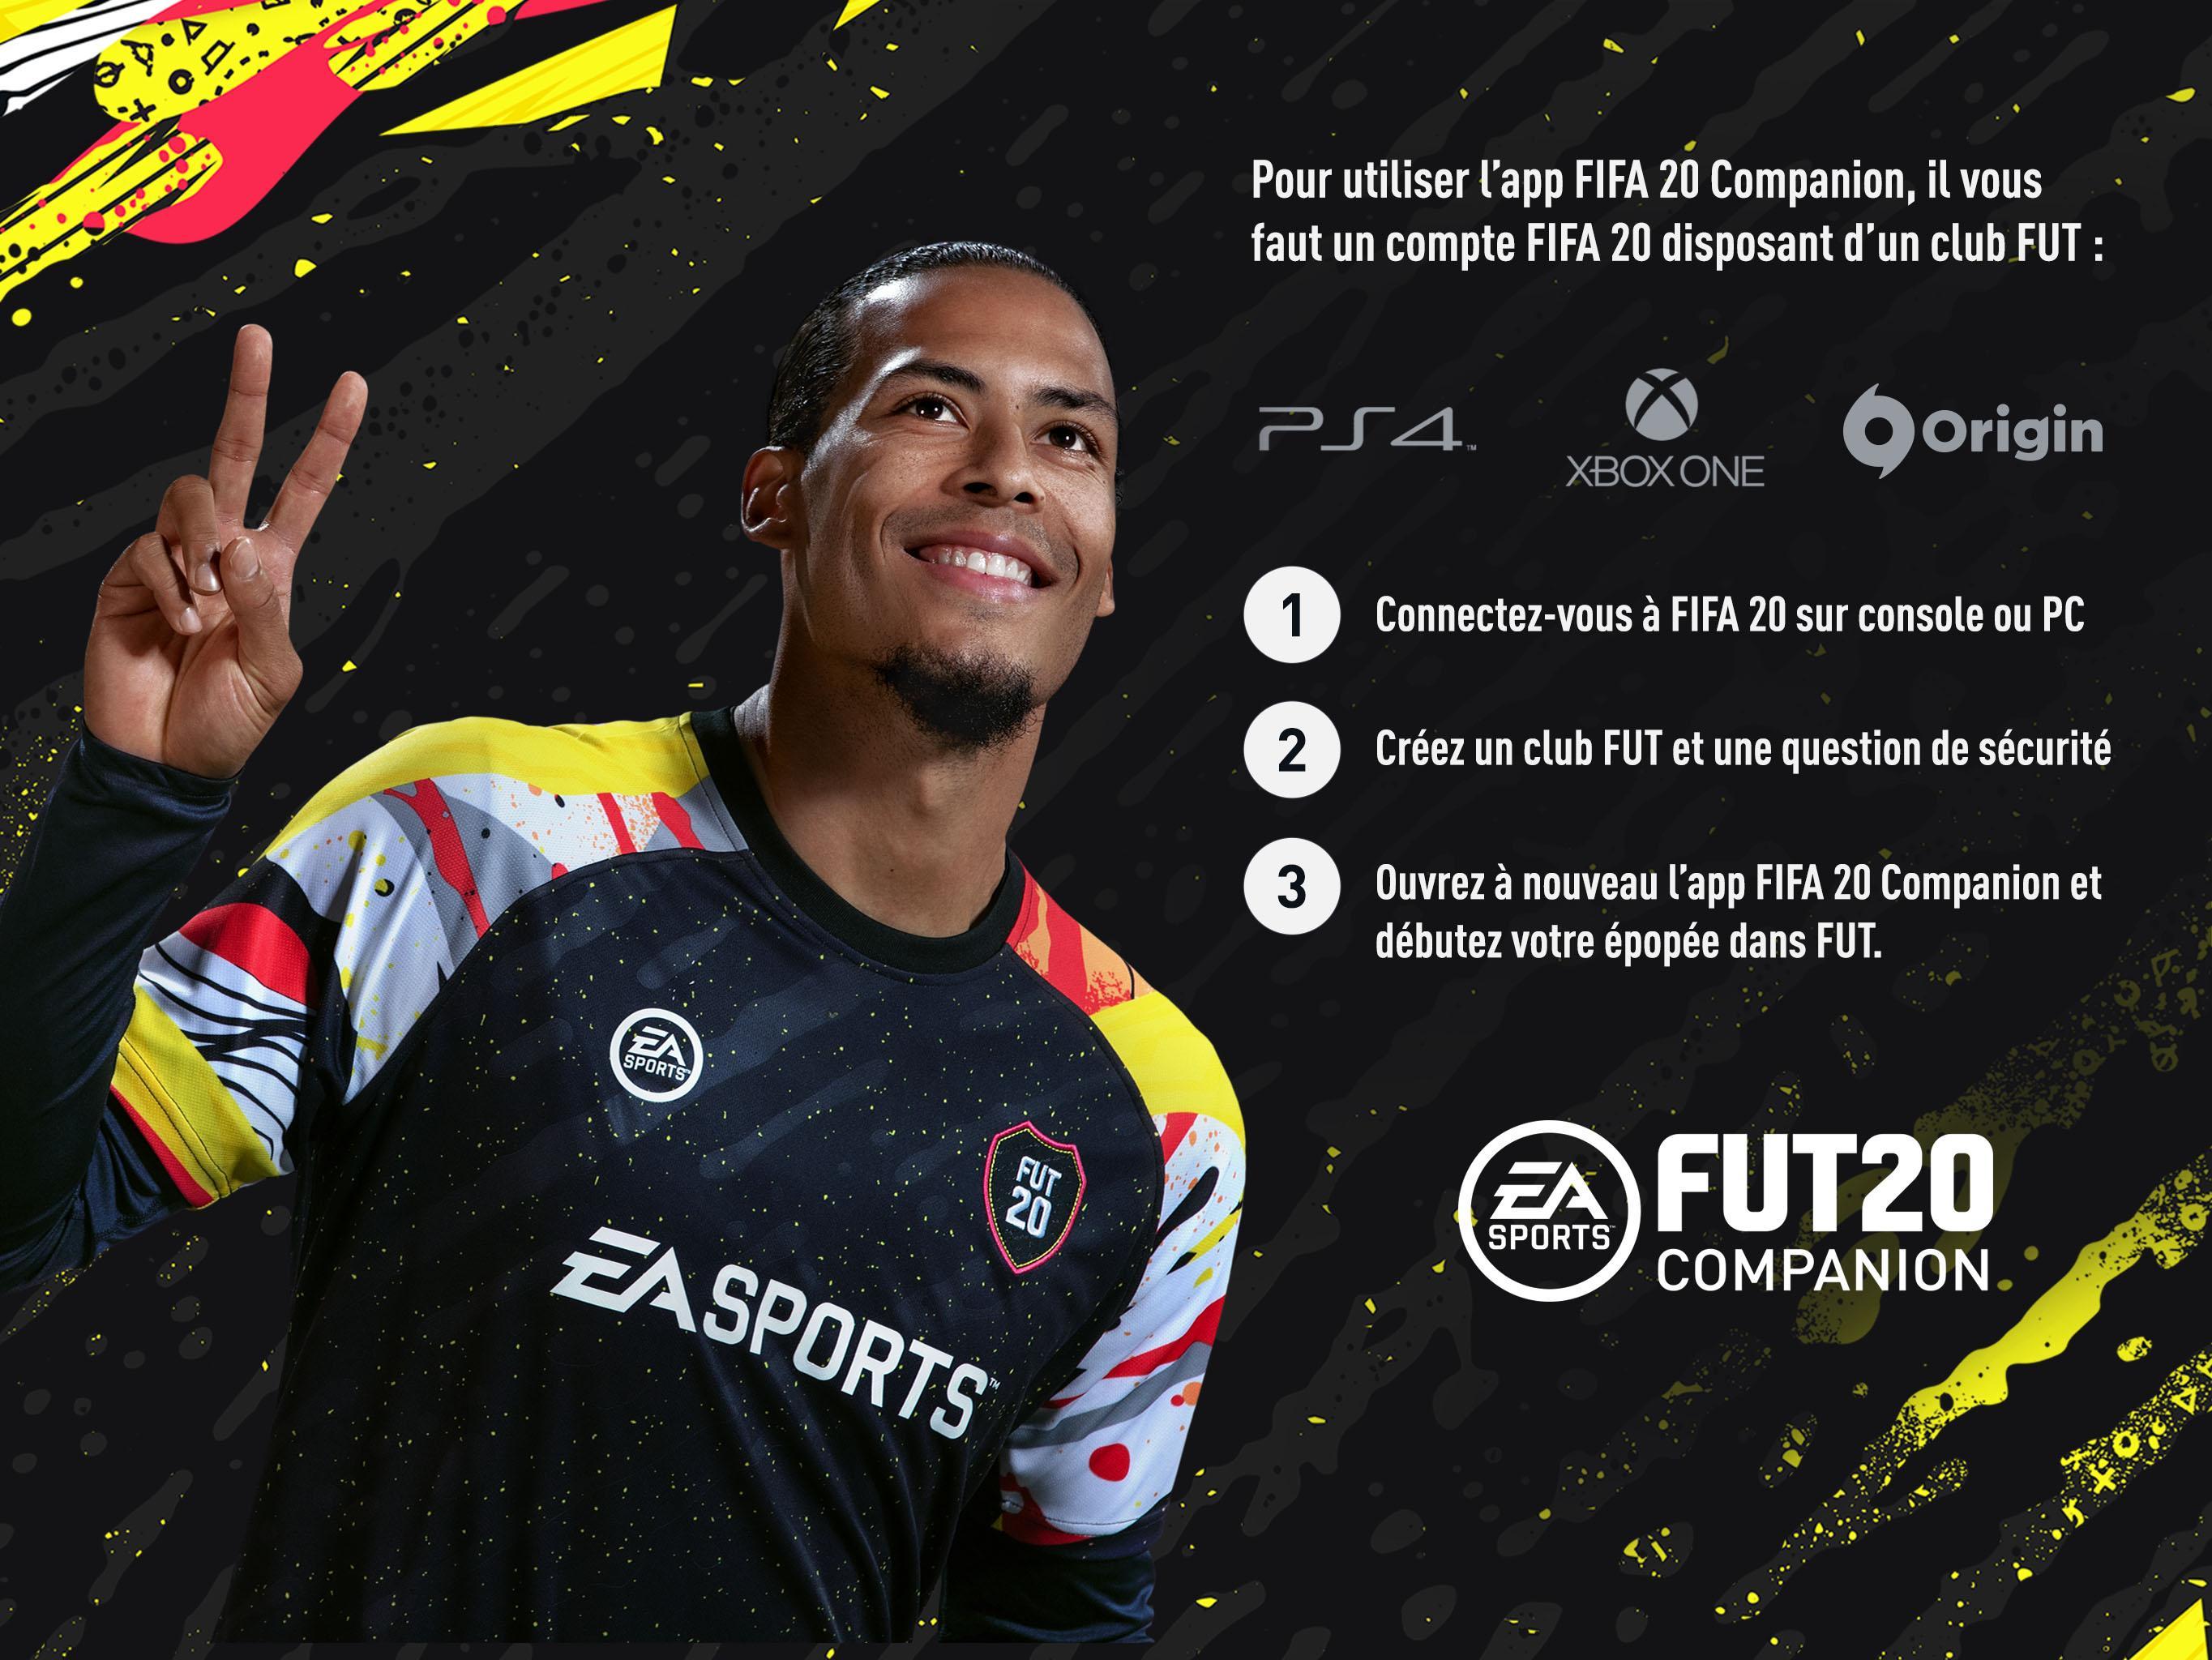 FIFA 17 Companion 20.6.1.187905 APK Download, join a team, conquer the